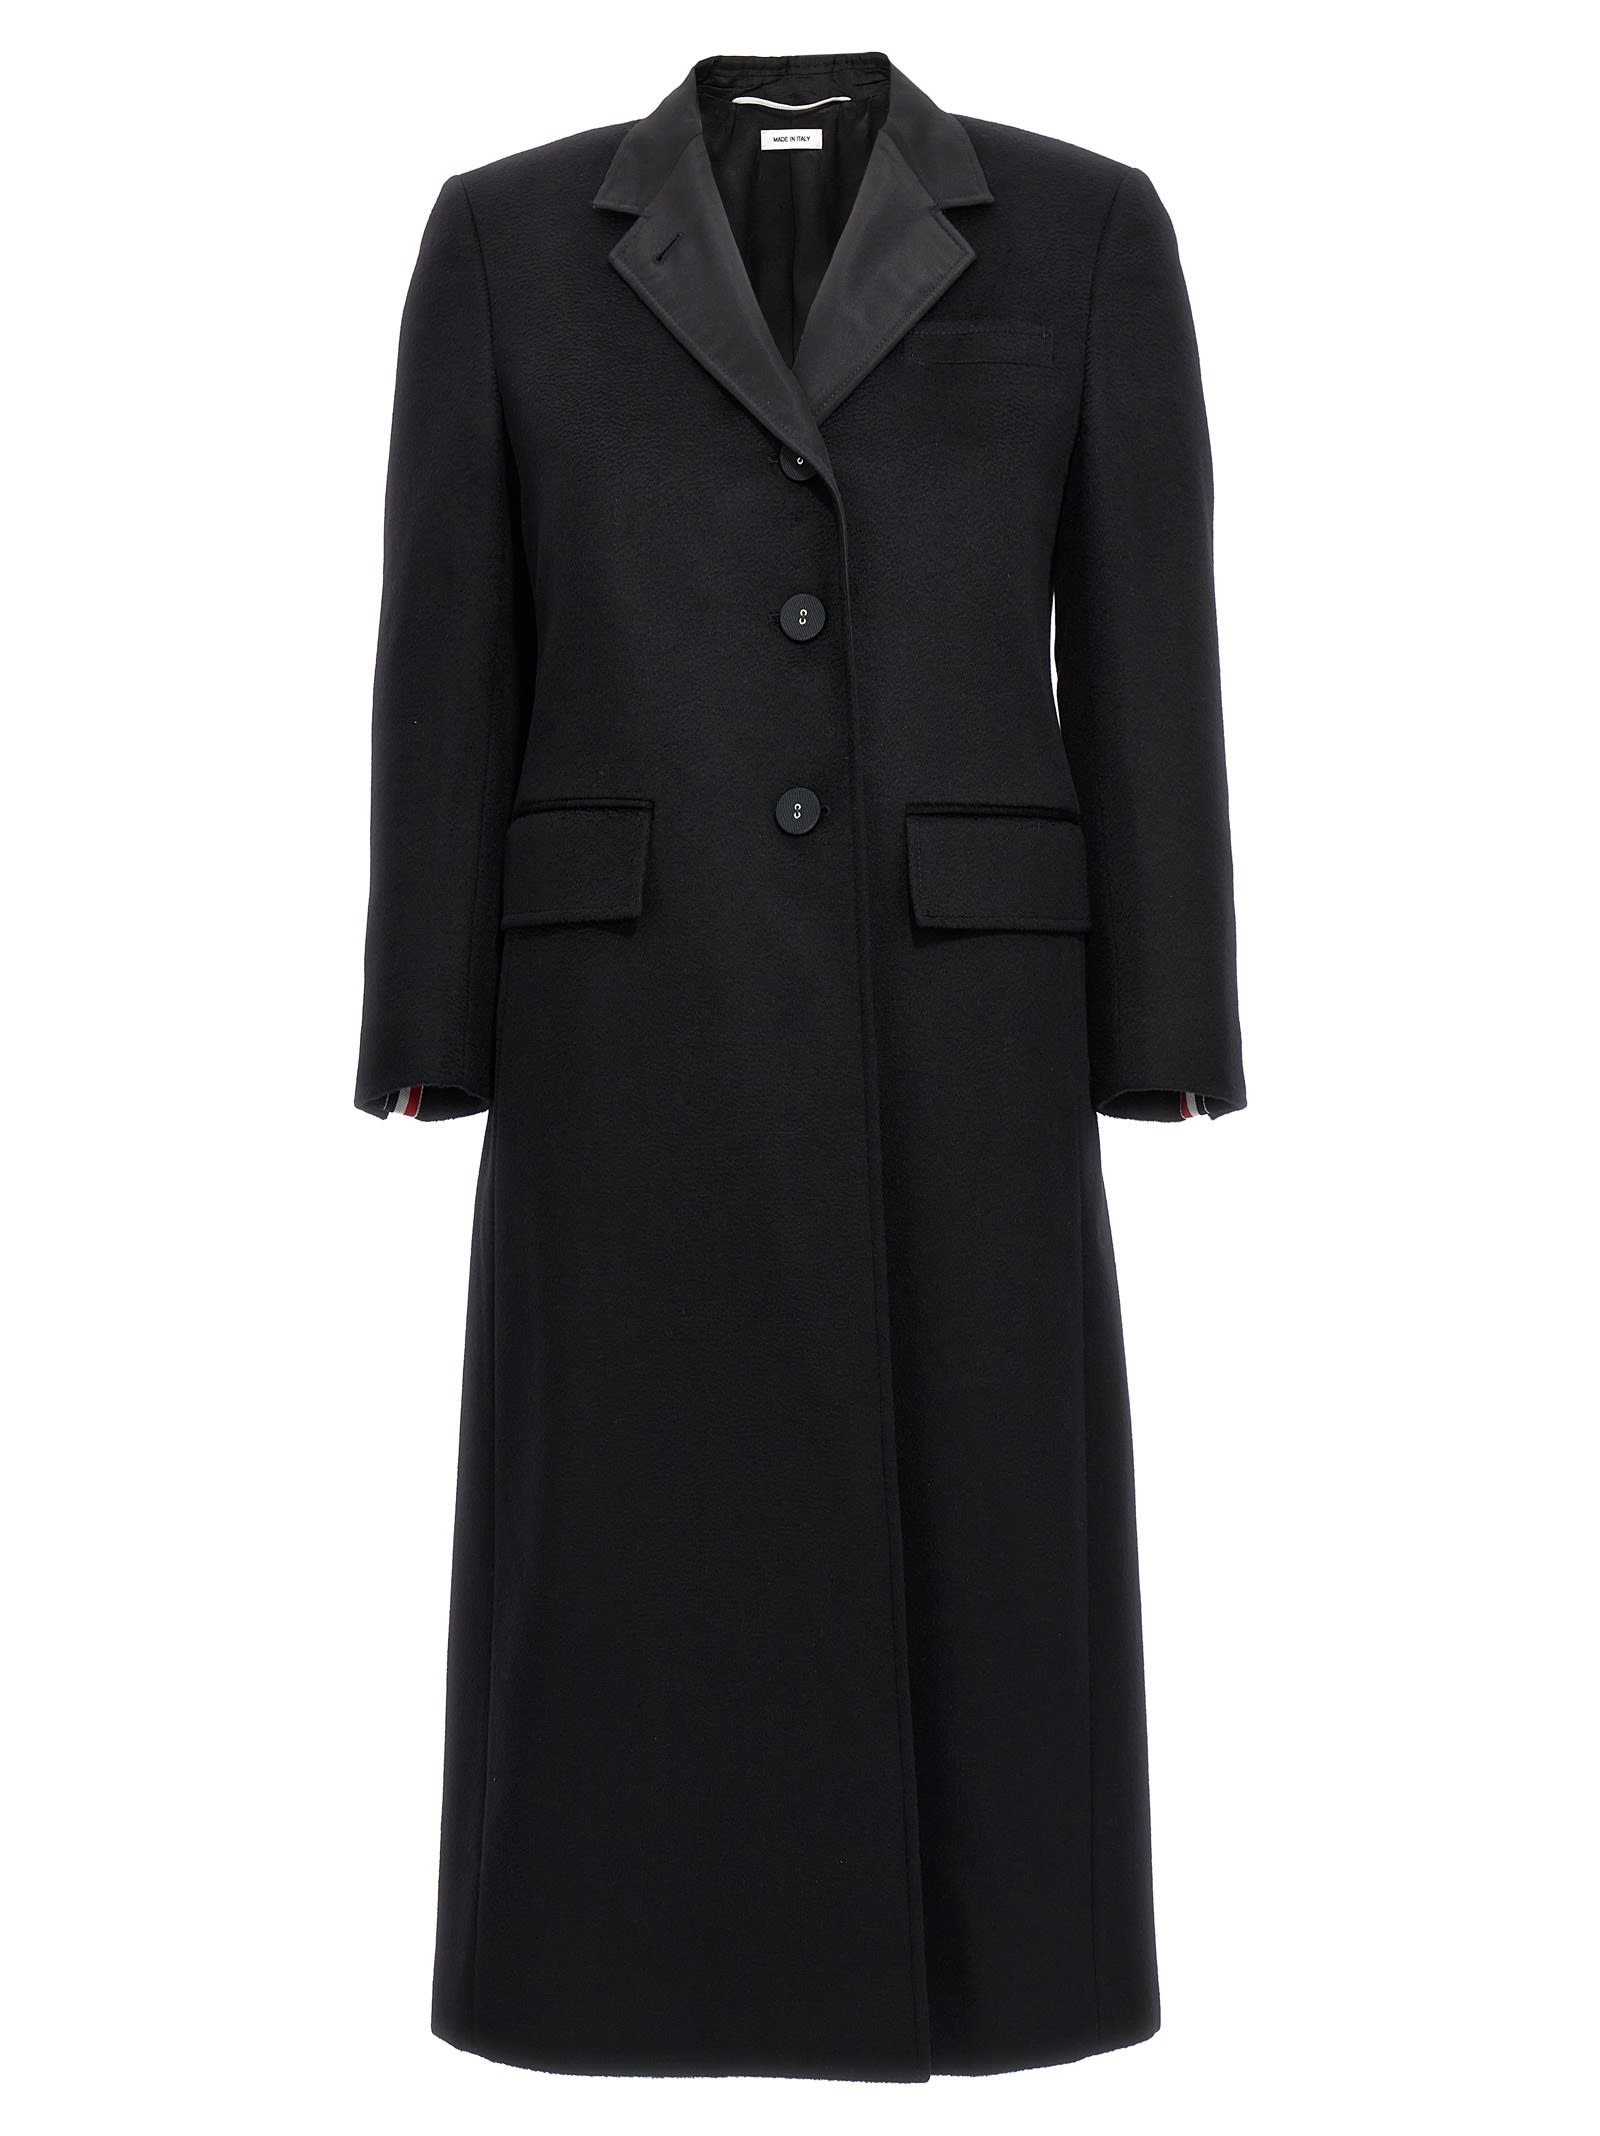 THOM BROWNE SINGLE-BREASTED CASHMERE COAT